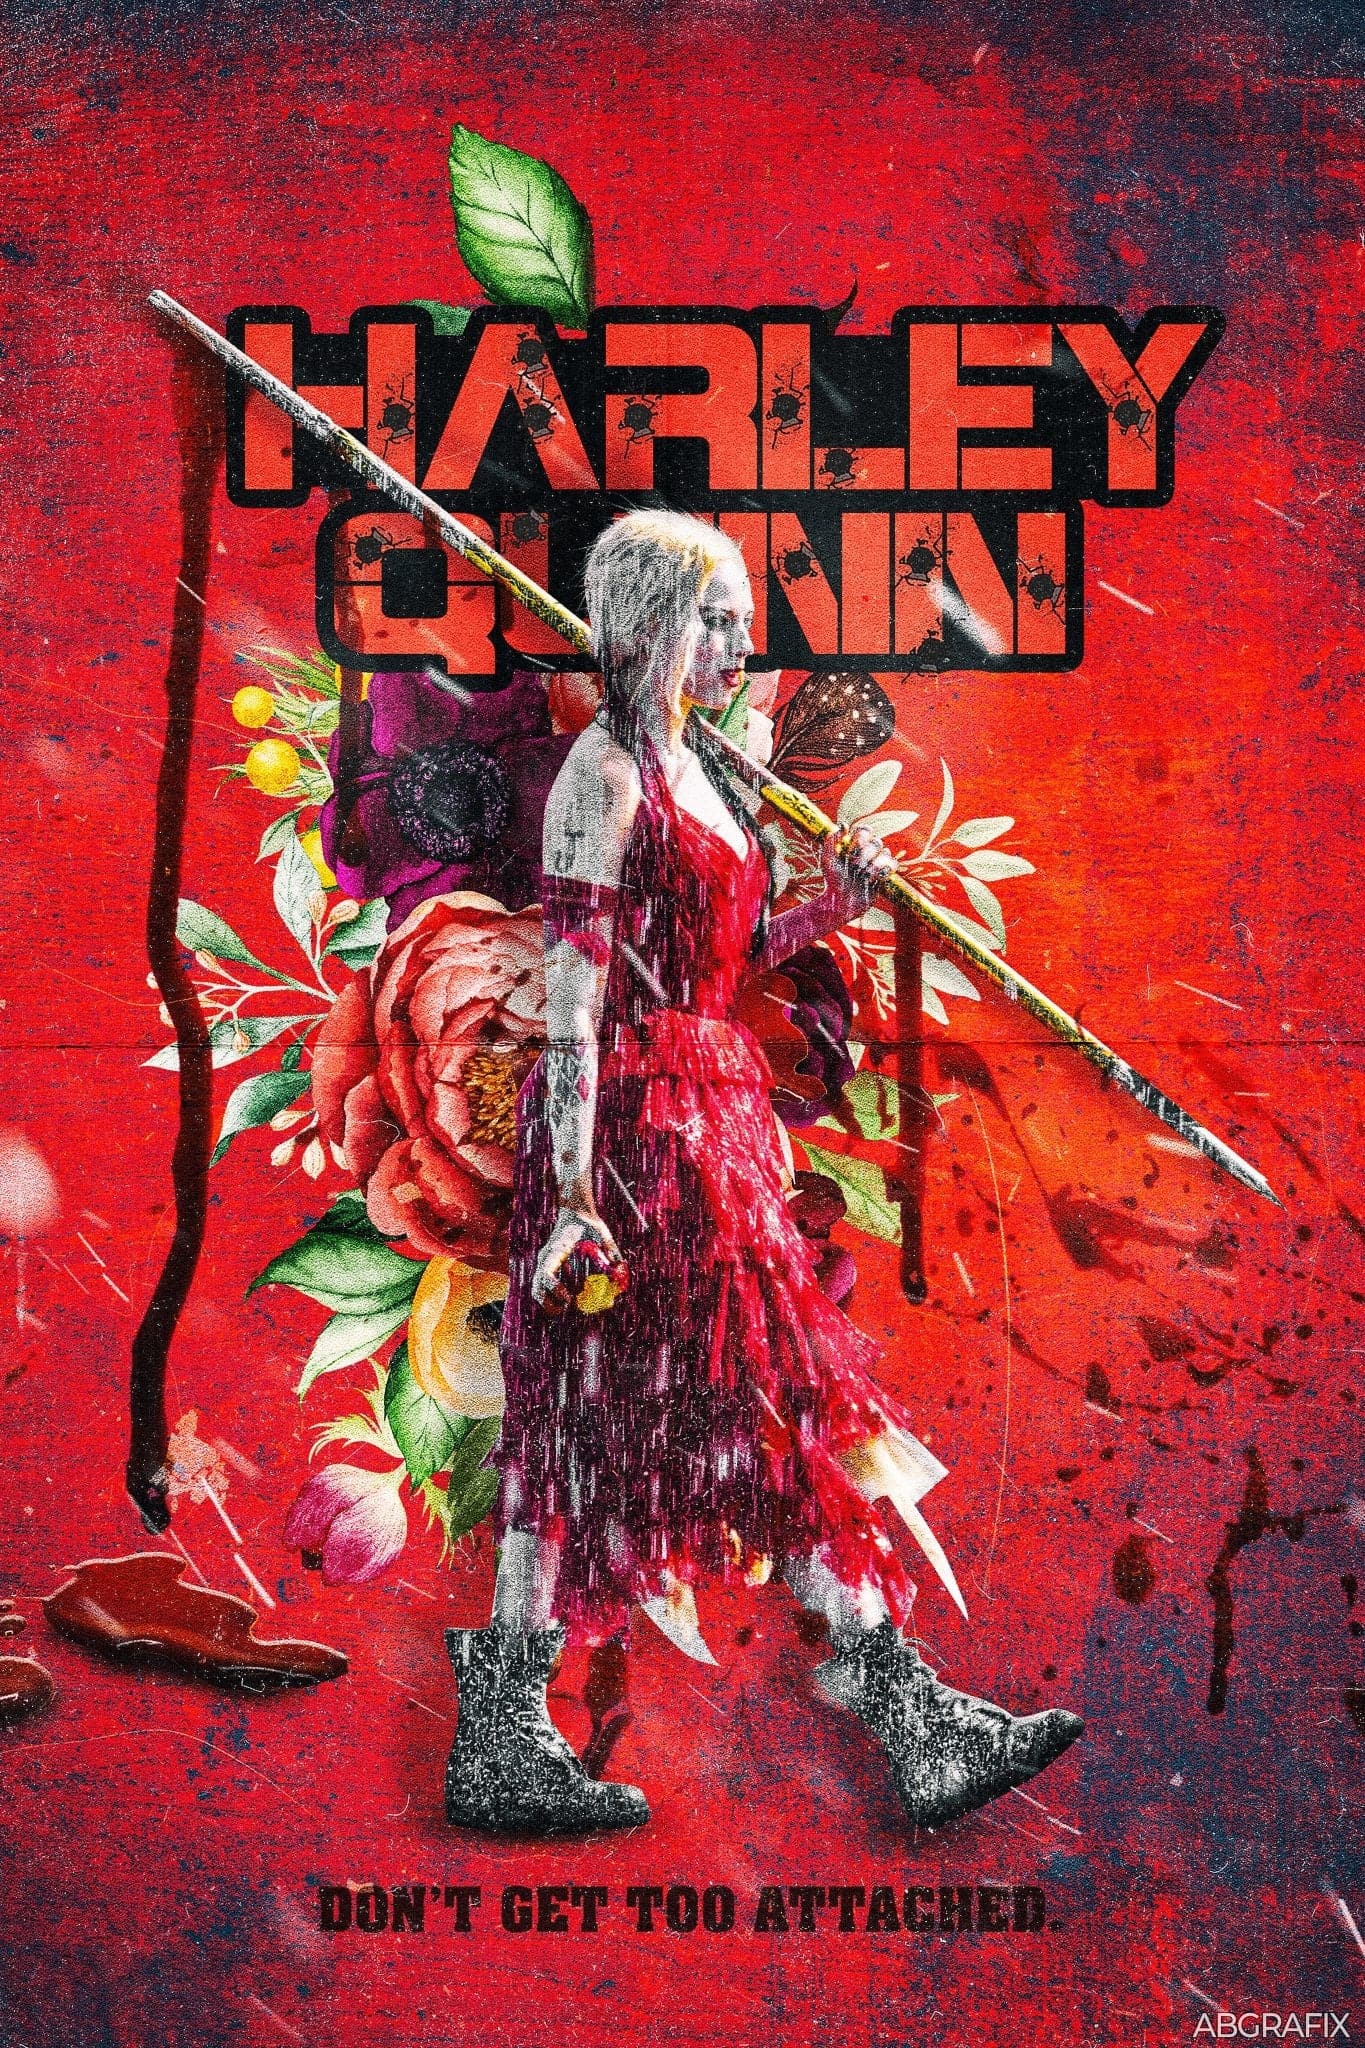 Harley Quinn ‘Suicide Squad’ Movie Poster - Posters Plug